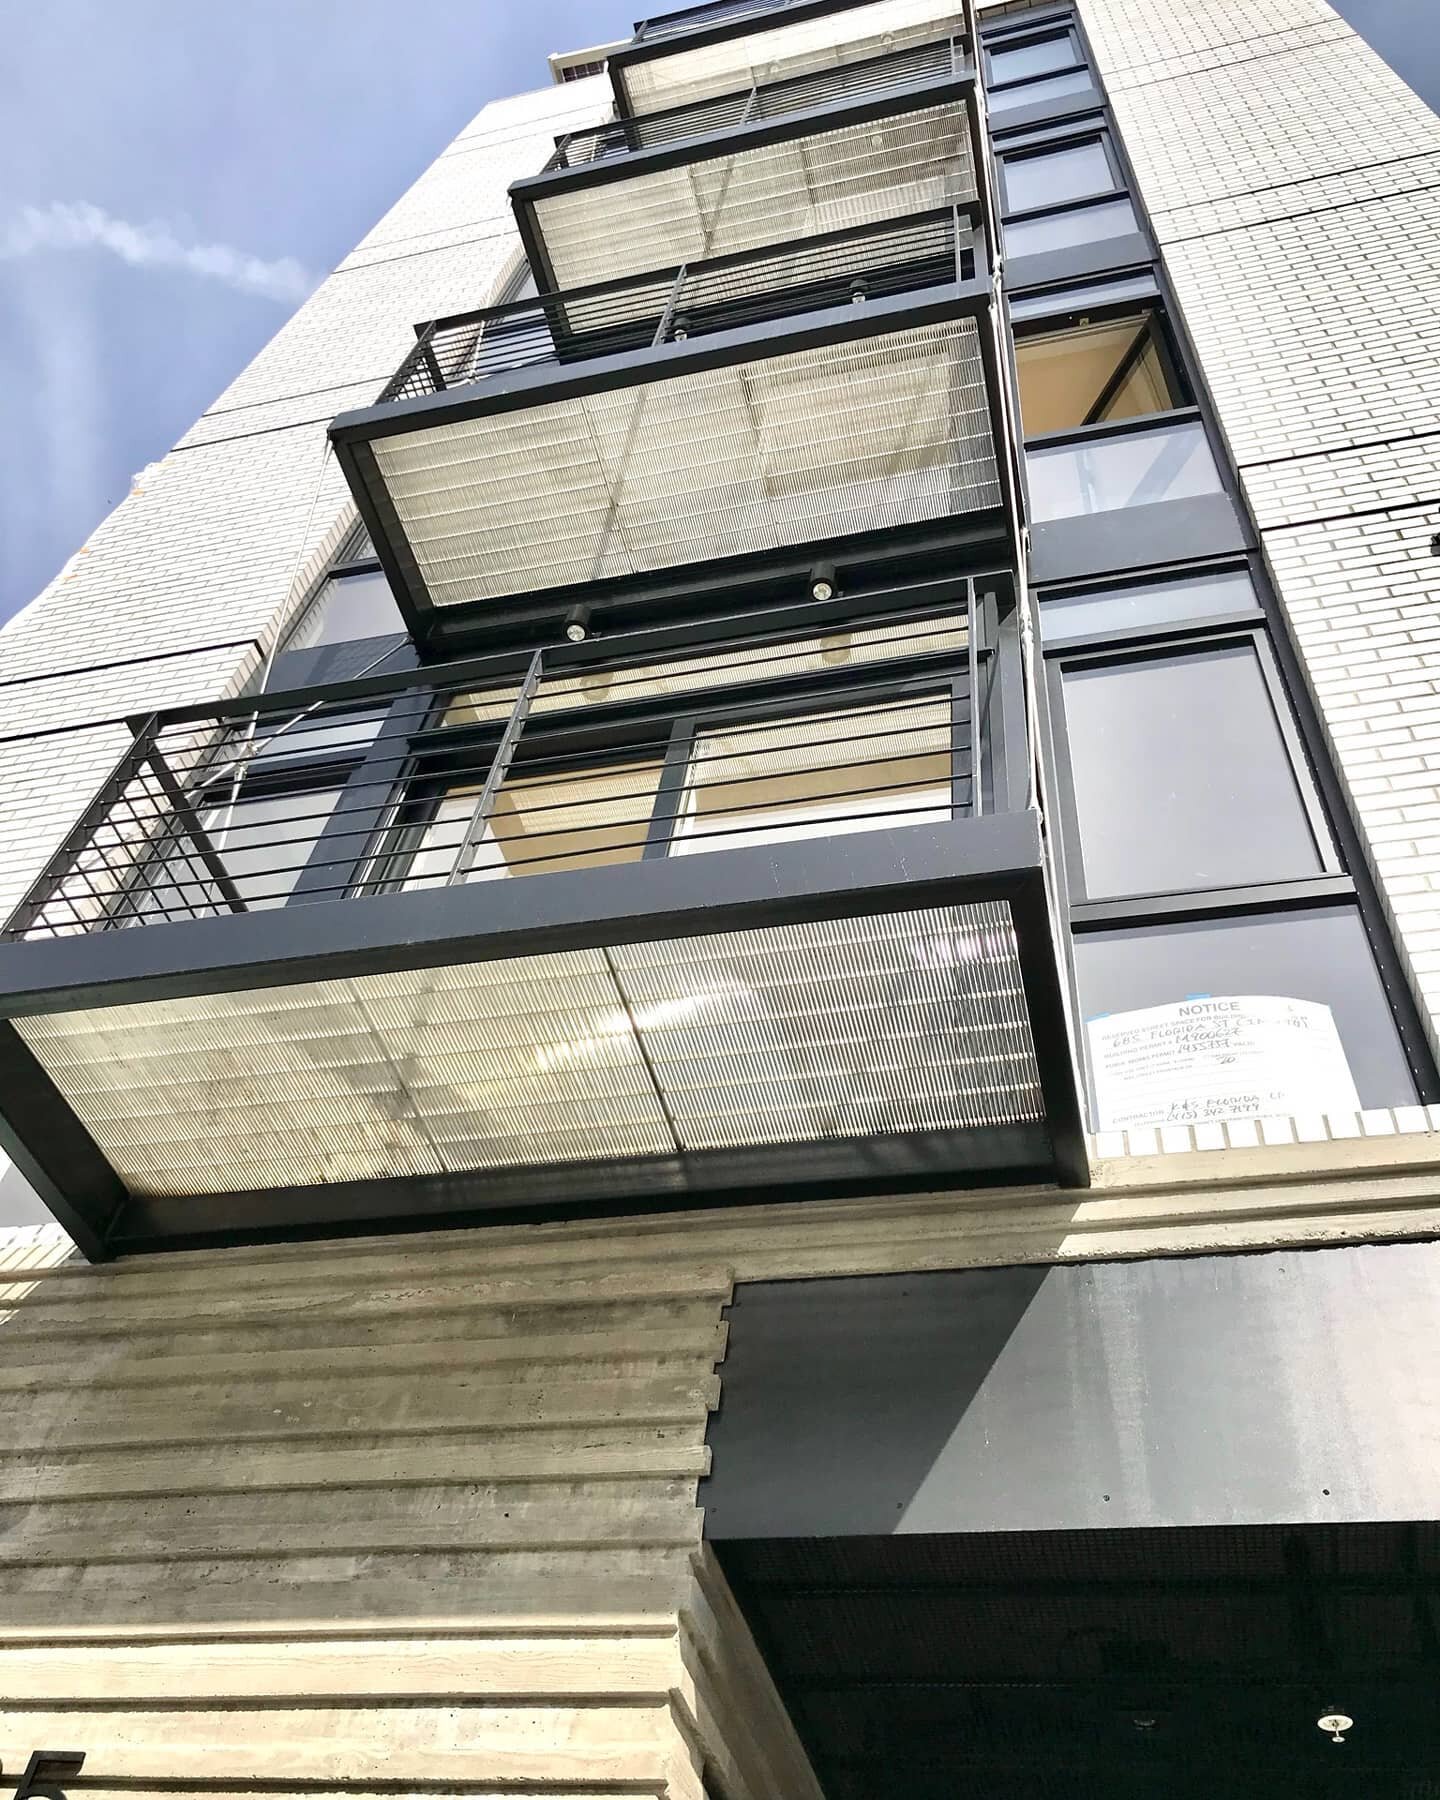 { New build }

~Florida St - 

Project - Sol-Lux Alpha-

4 condominium residence in the heart of the historical Mission District

All credit to Deanna @justmovefitnesssf
 For her photography skills 📸✋
 
#oakleafconstruction
#balconydecor
#newbuild
#